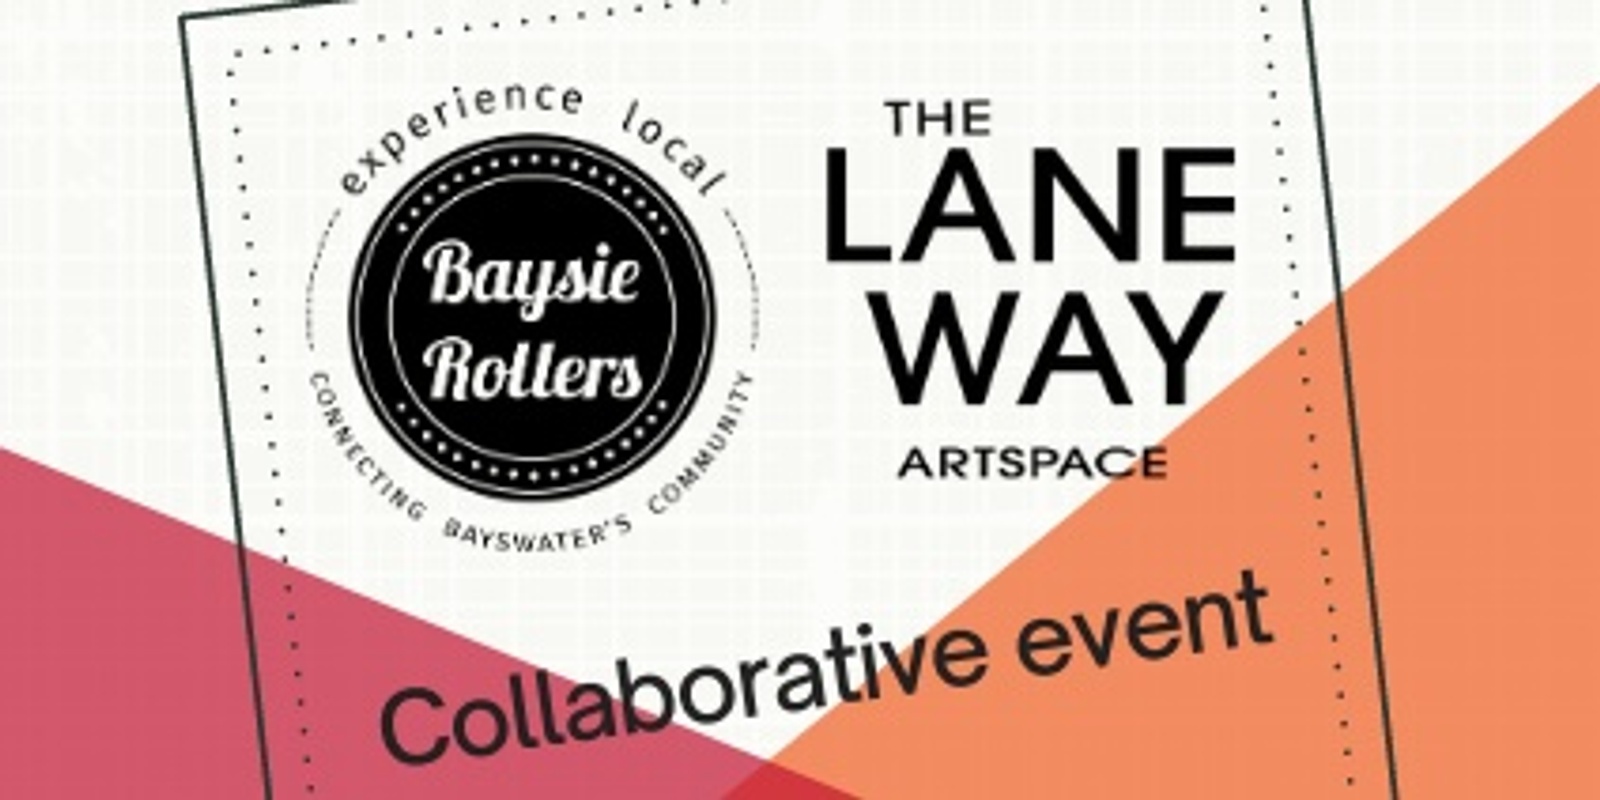 Banner image for Baysie Rollers Art Auction 2021 in collaboration with Laneway Art Space